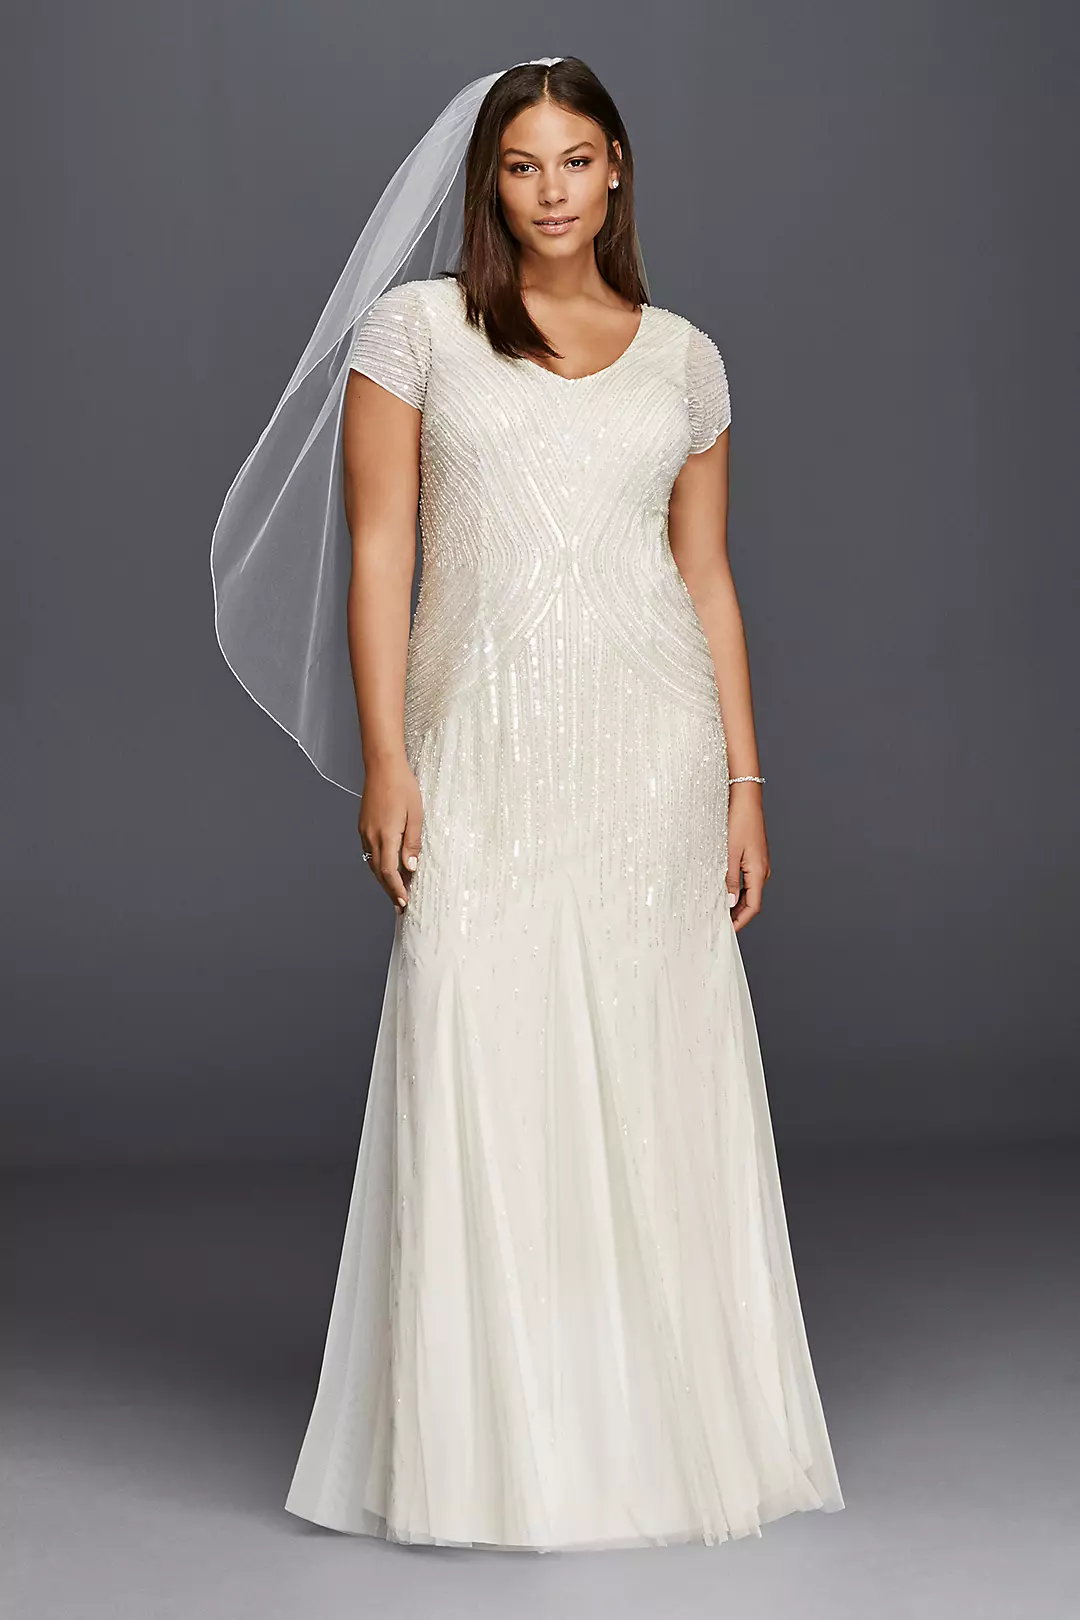 Short Sleeve Wedding Dress with All Over Beading Image